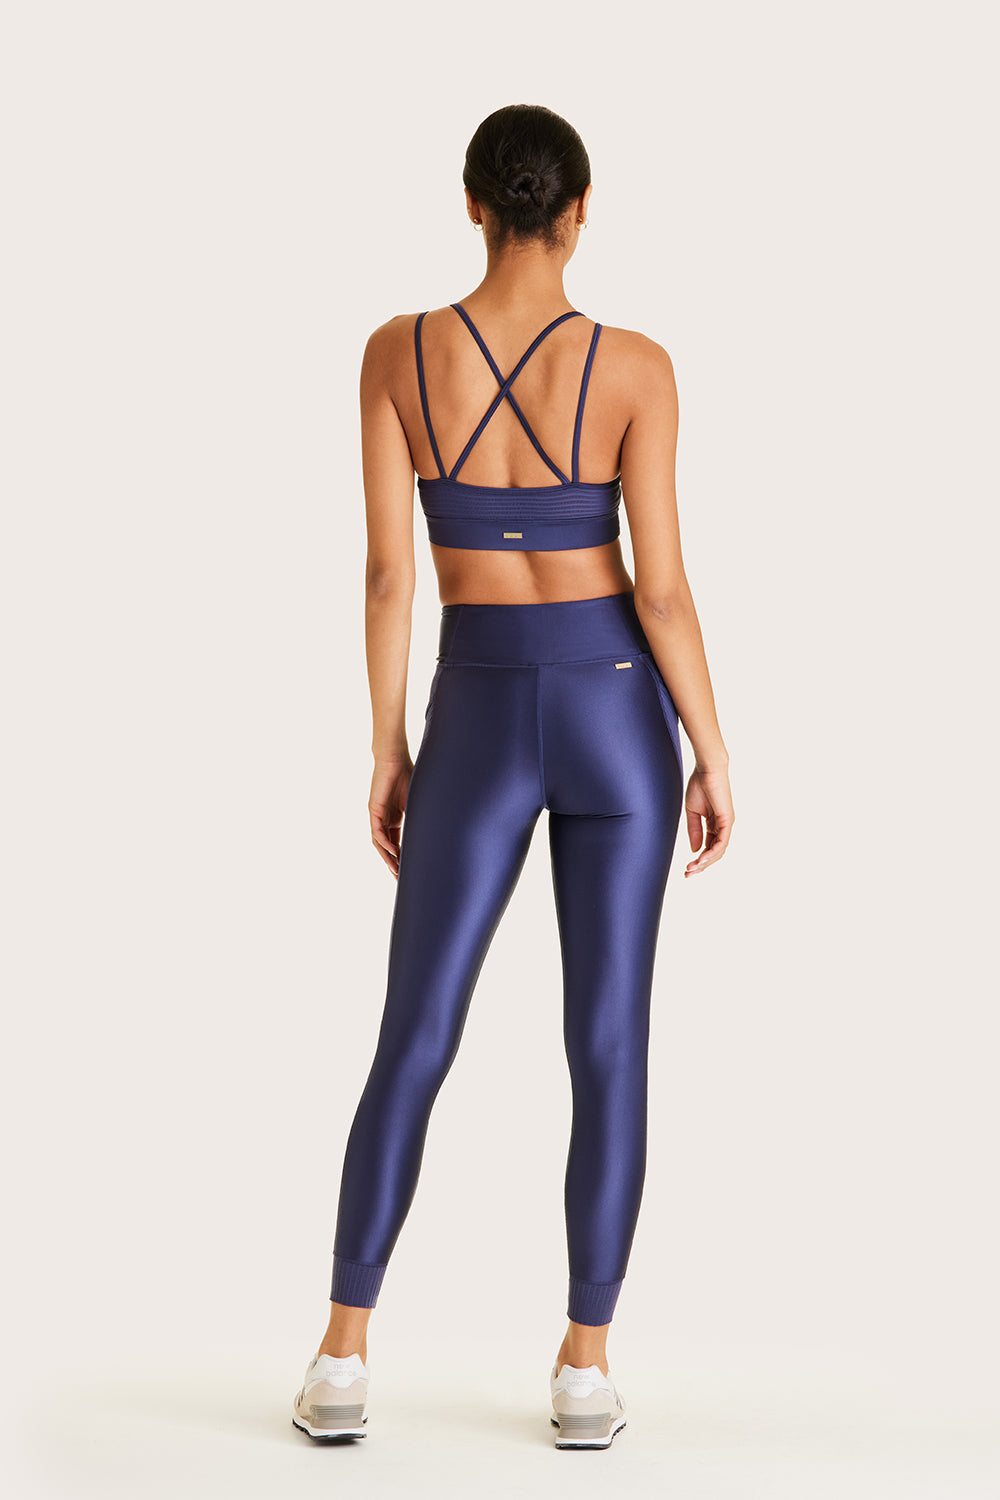 I'm Obsessed with These Athleisure Pieces From Carbon38